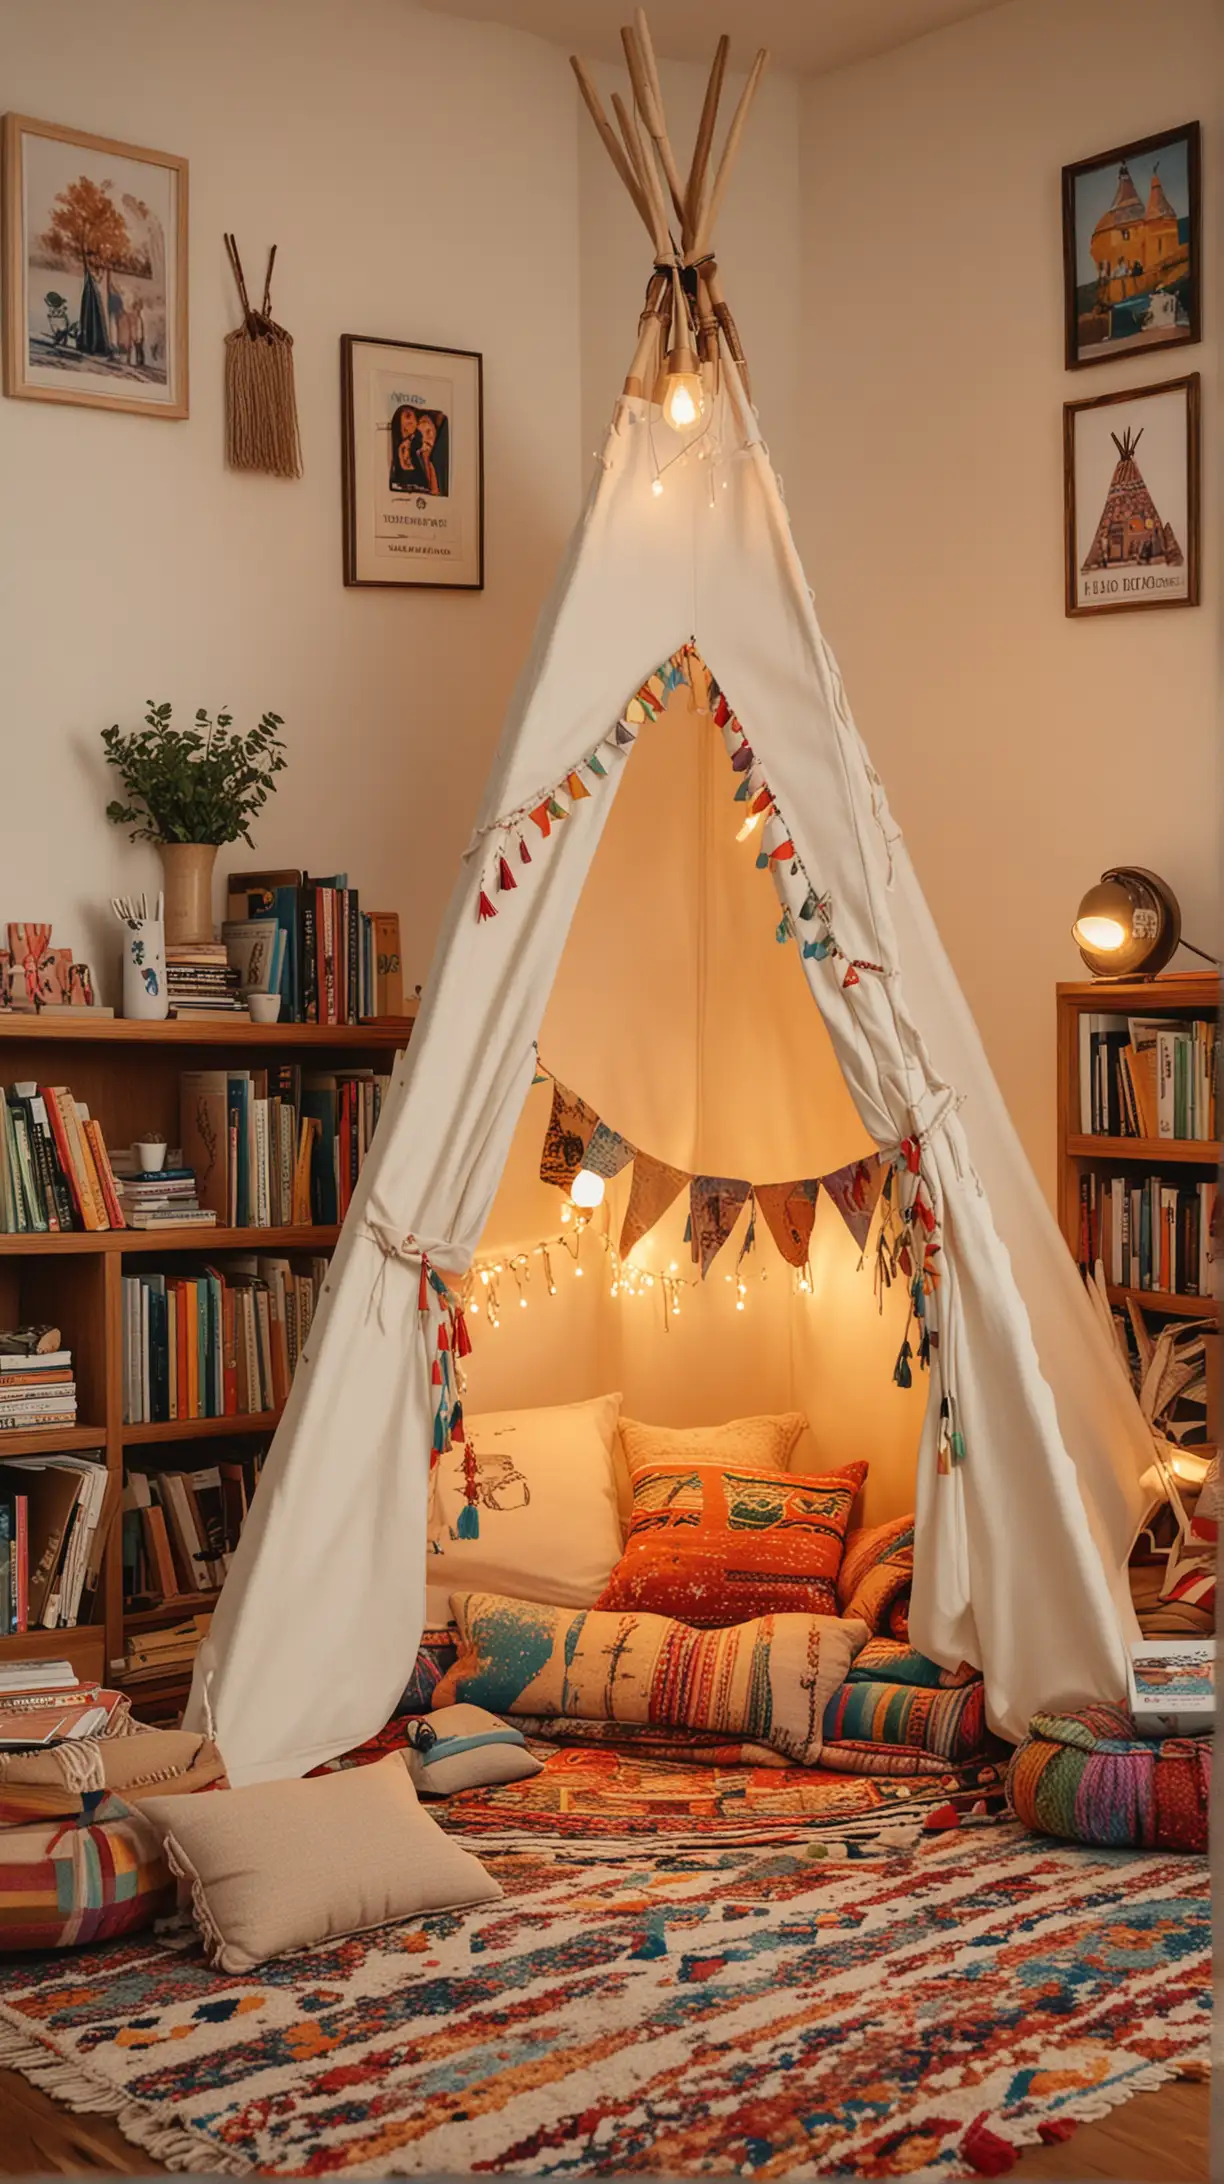 Cozy Living Room Teepee Tent with Childrens Books and Cushions